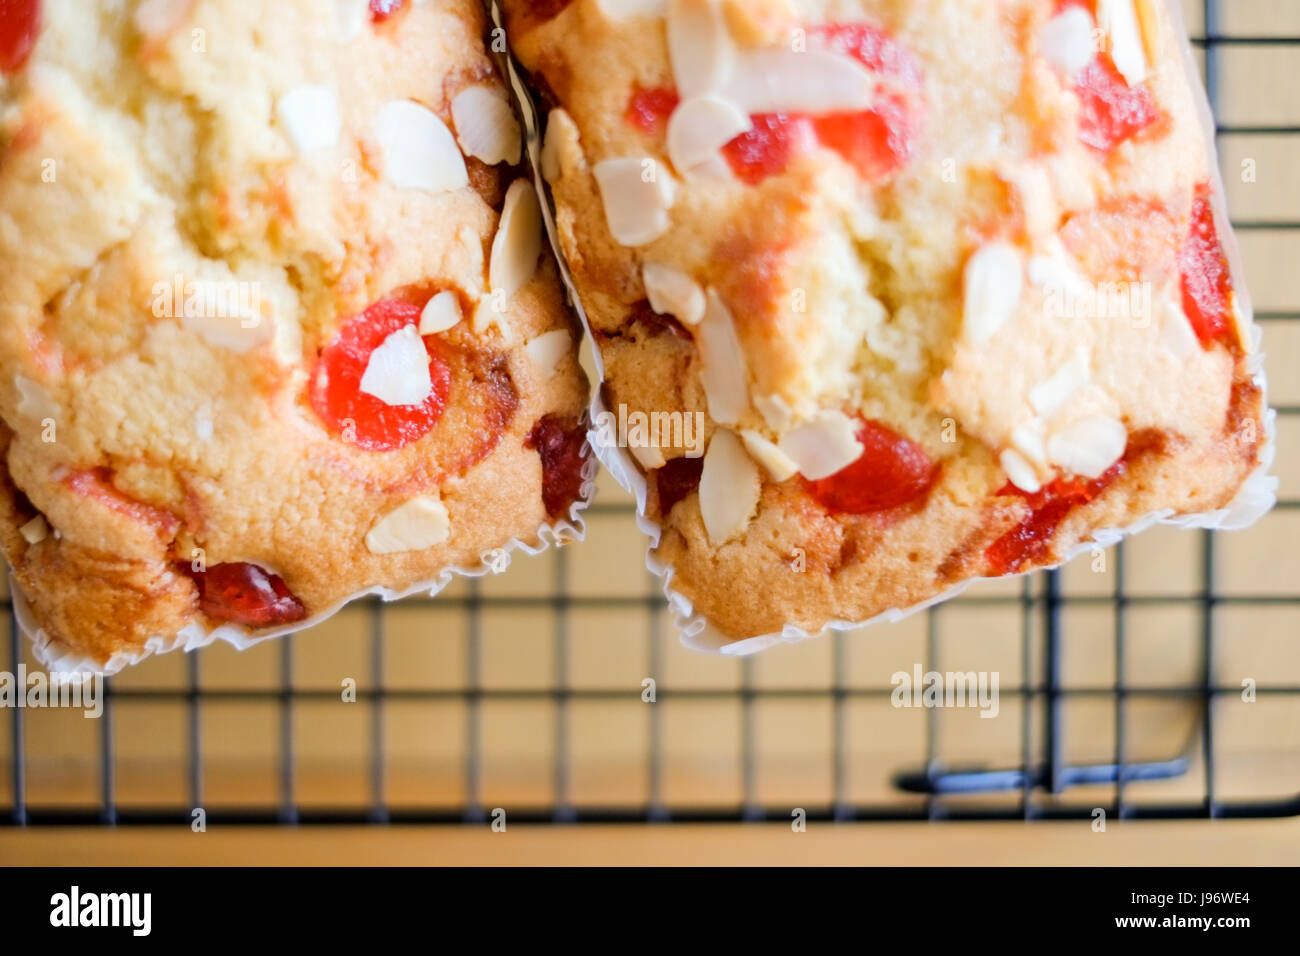 Home cooked food. Two cherry and almond cakes on a cooling rack. Stock Photo